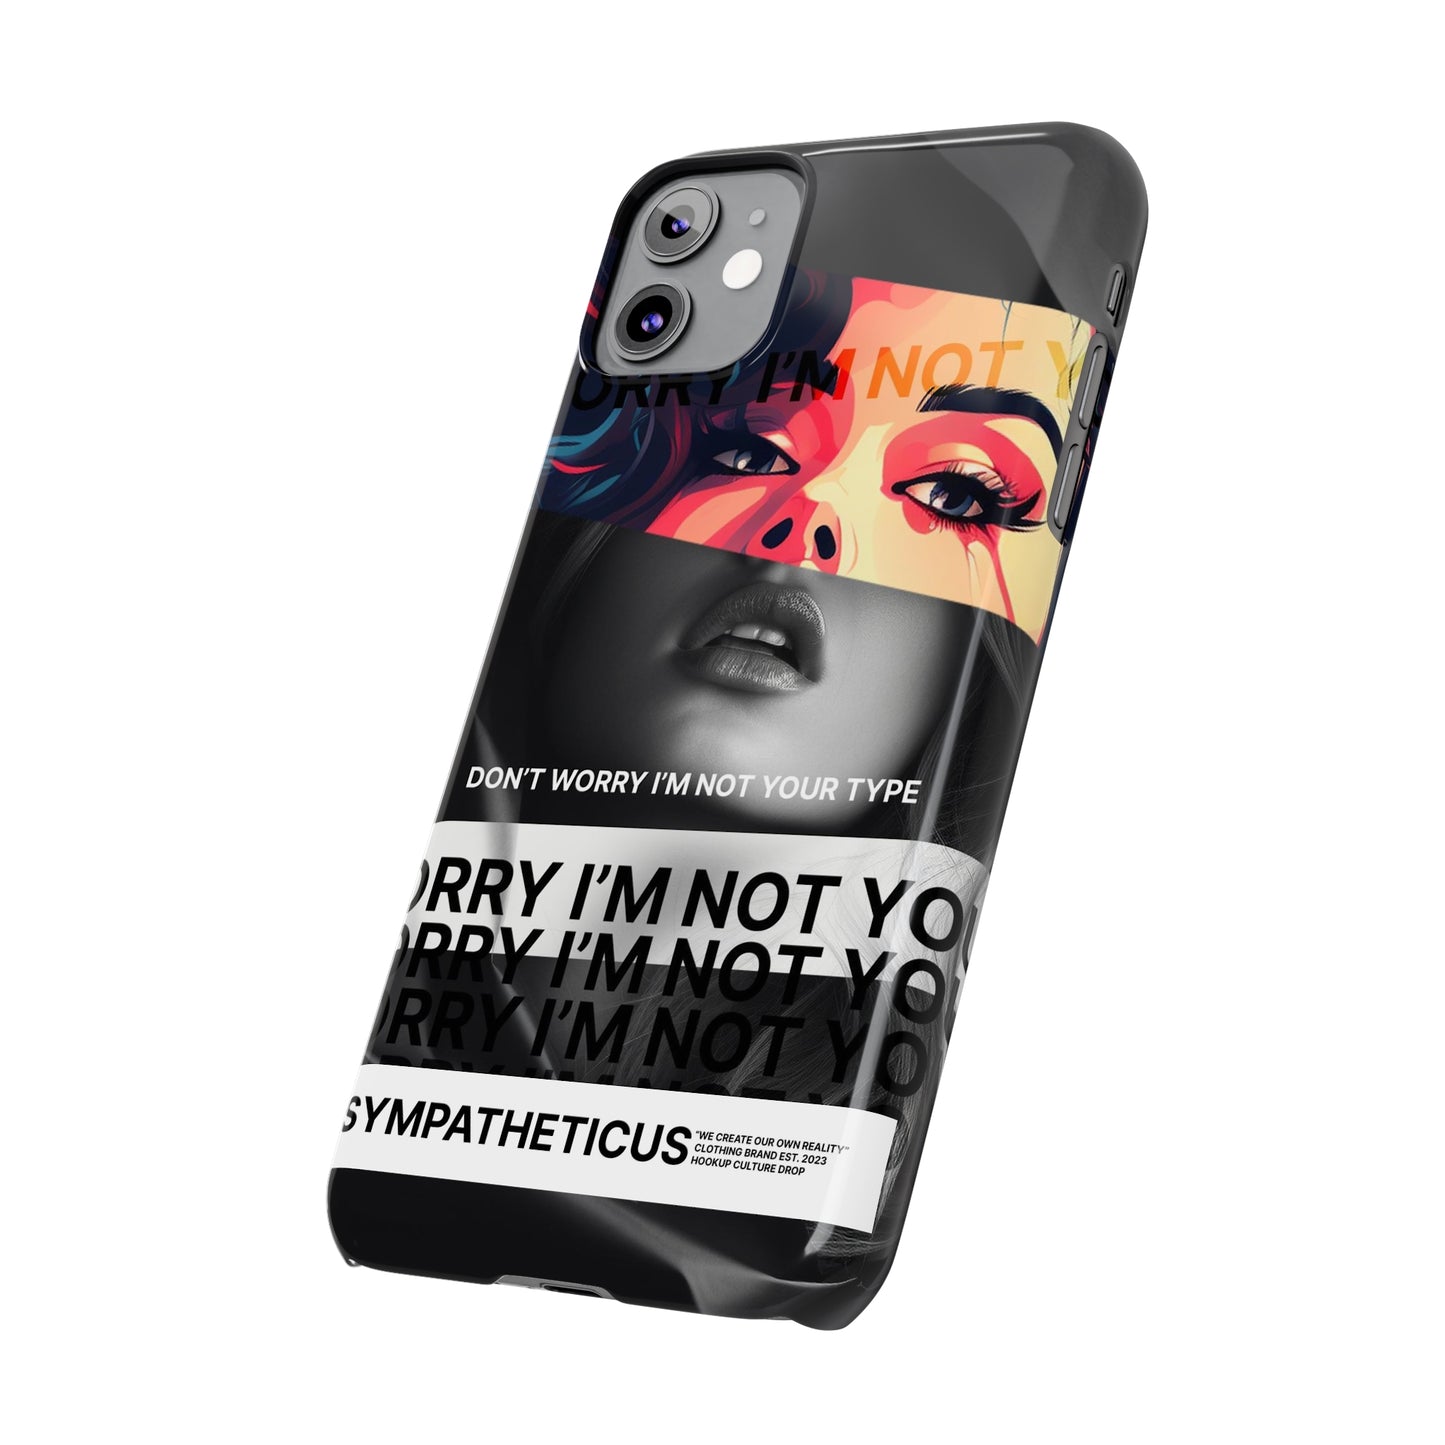 Hookup culture special iphone case-06